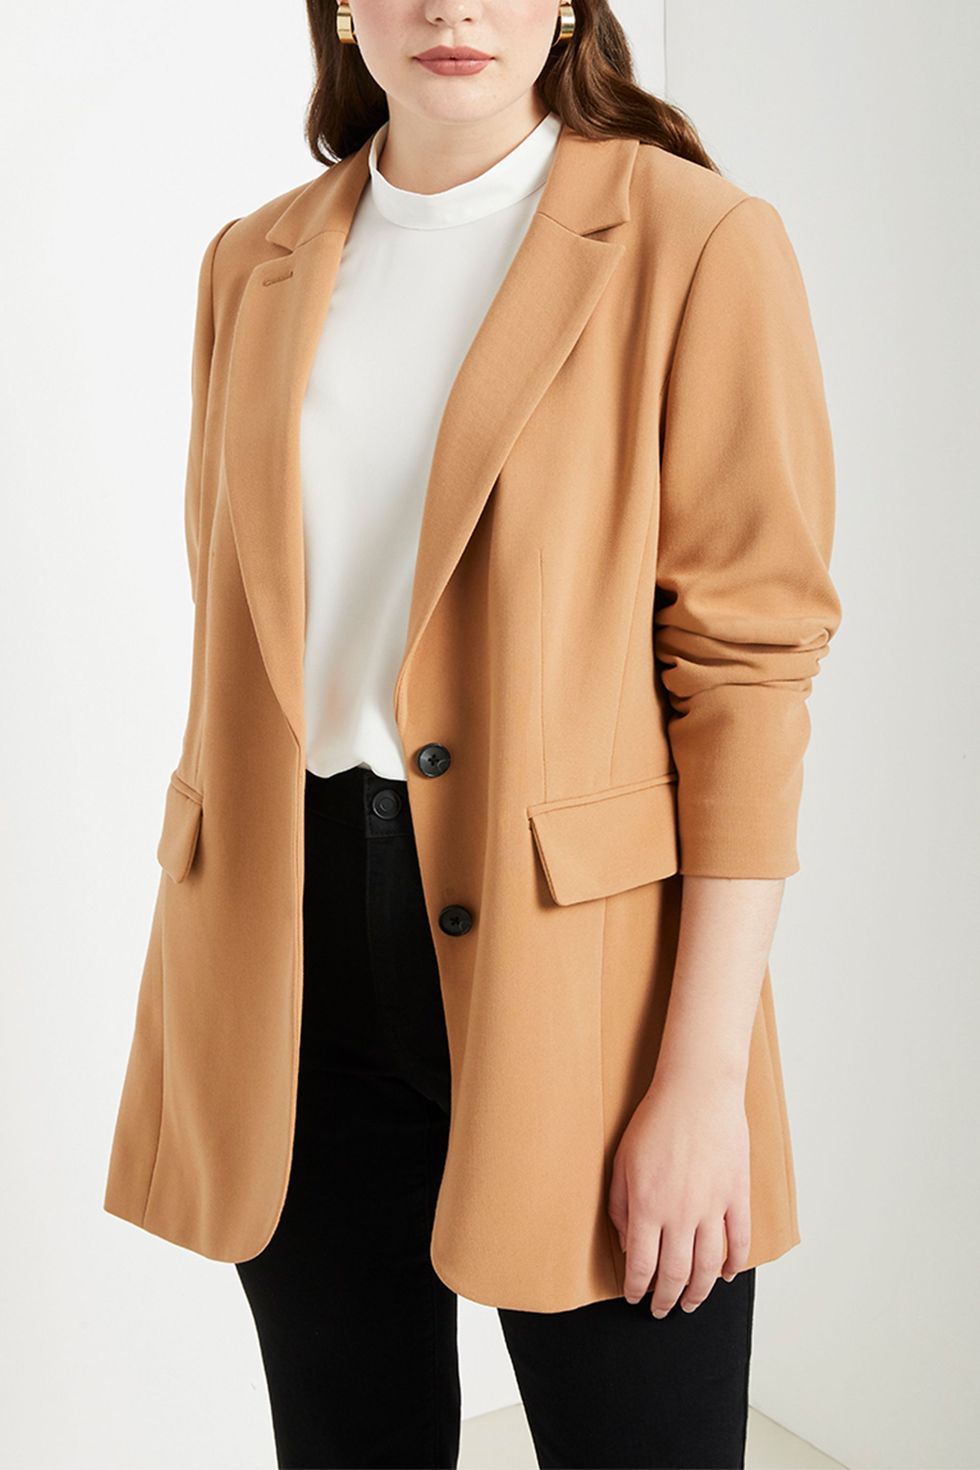 Long Blazer For Women - Find The Right One To Match Her